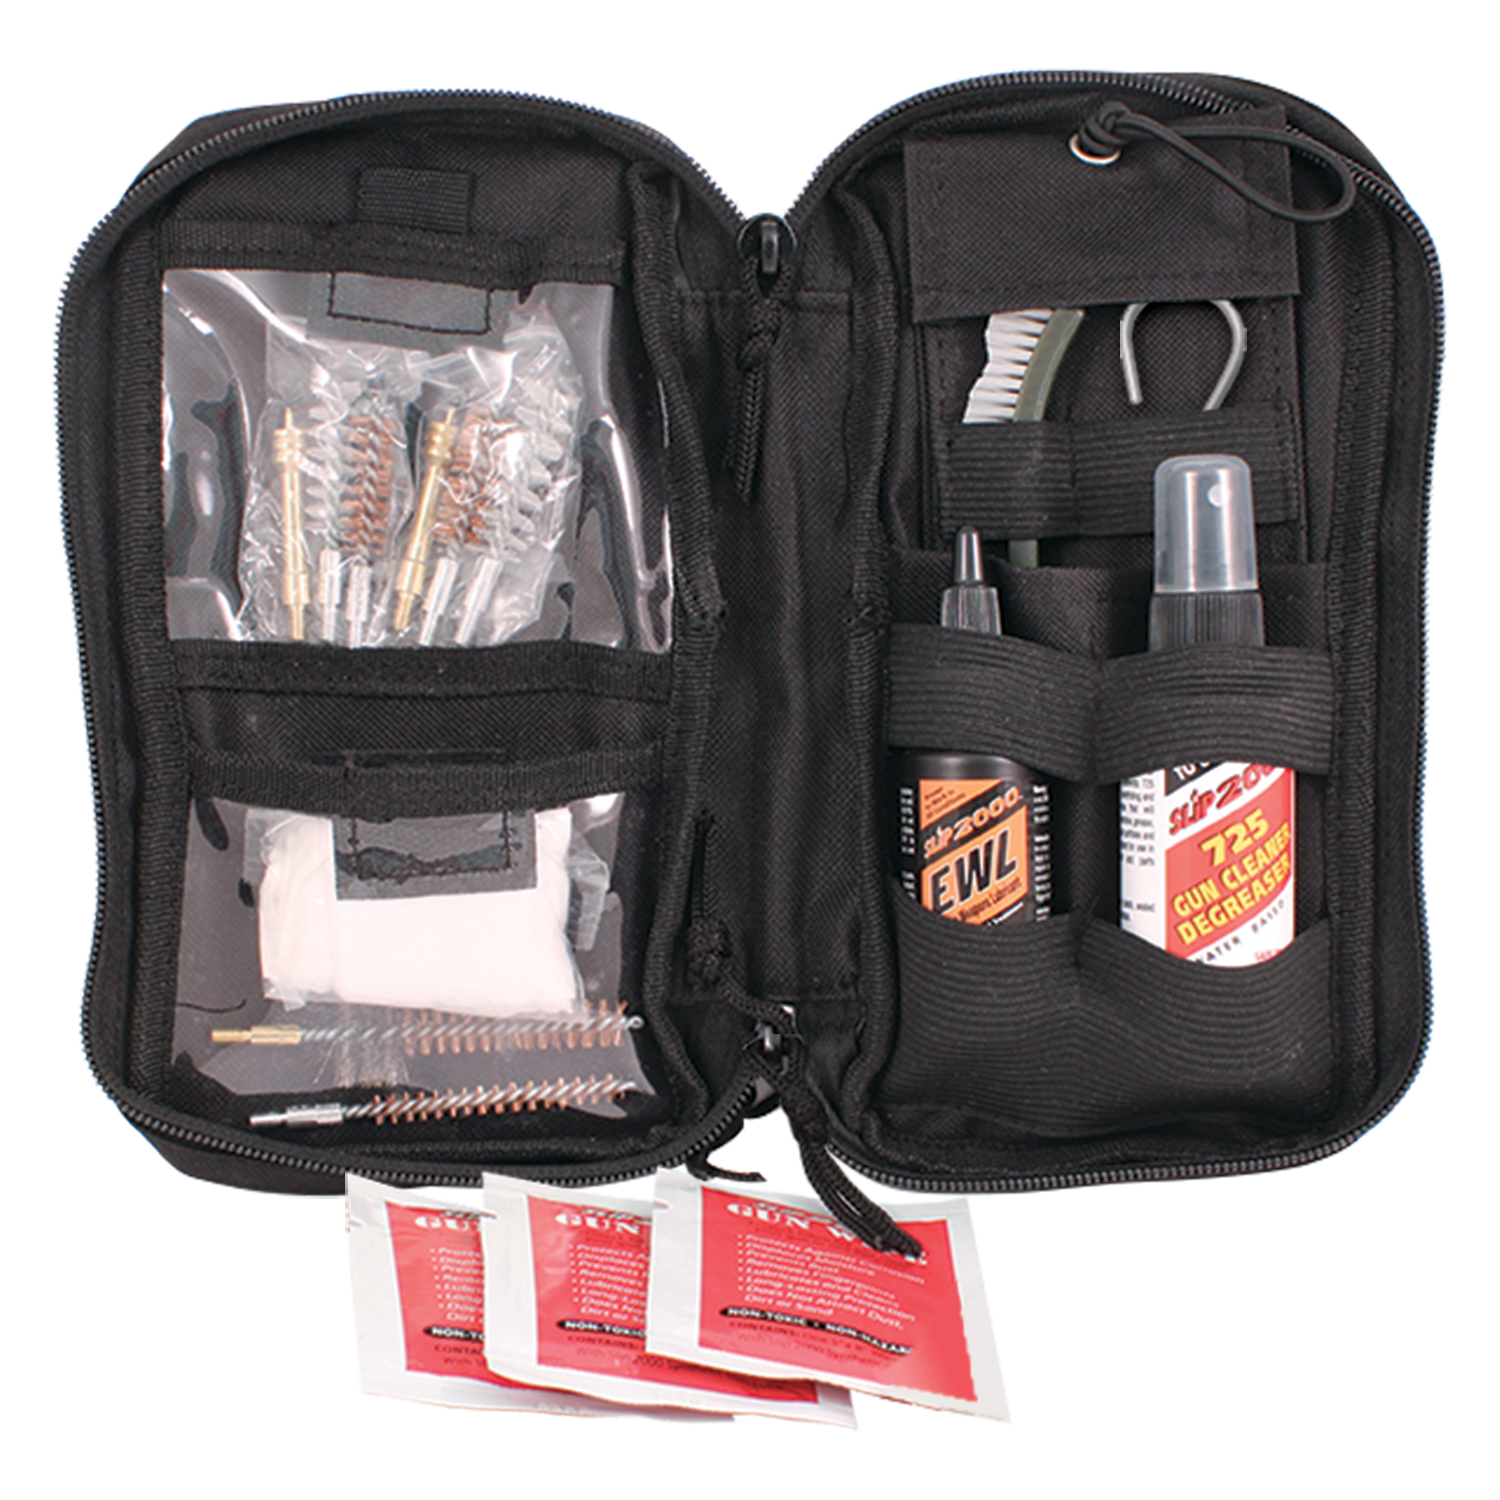 OUT OF STOCK - Law Enforcement Tactical Cleaning Kit - .357 / 9mm / .40 / .223 Cal